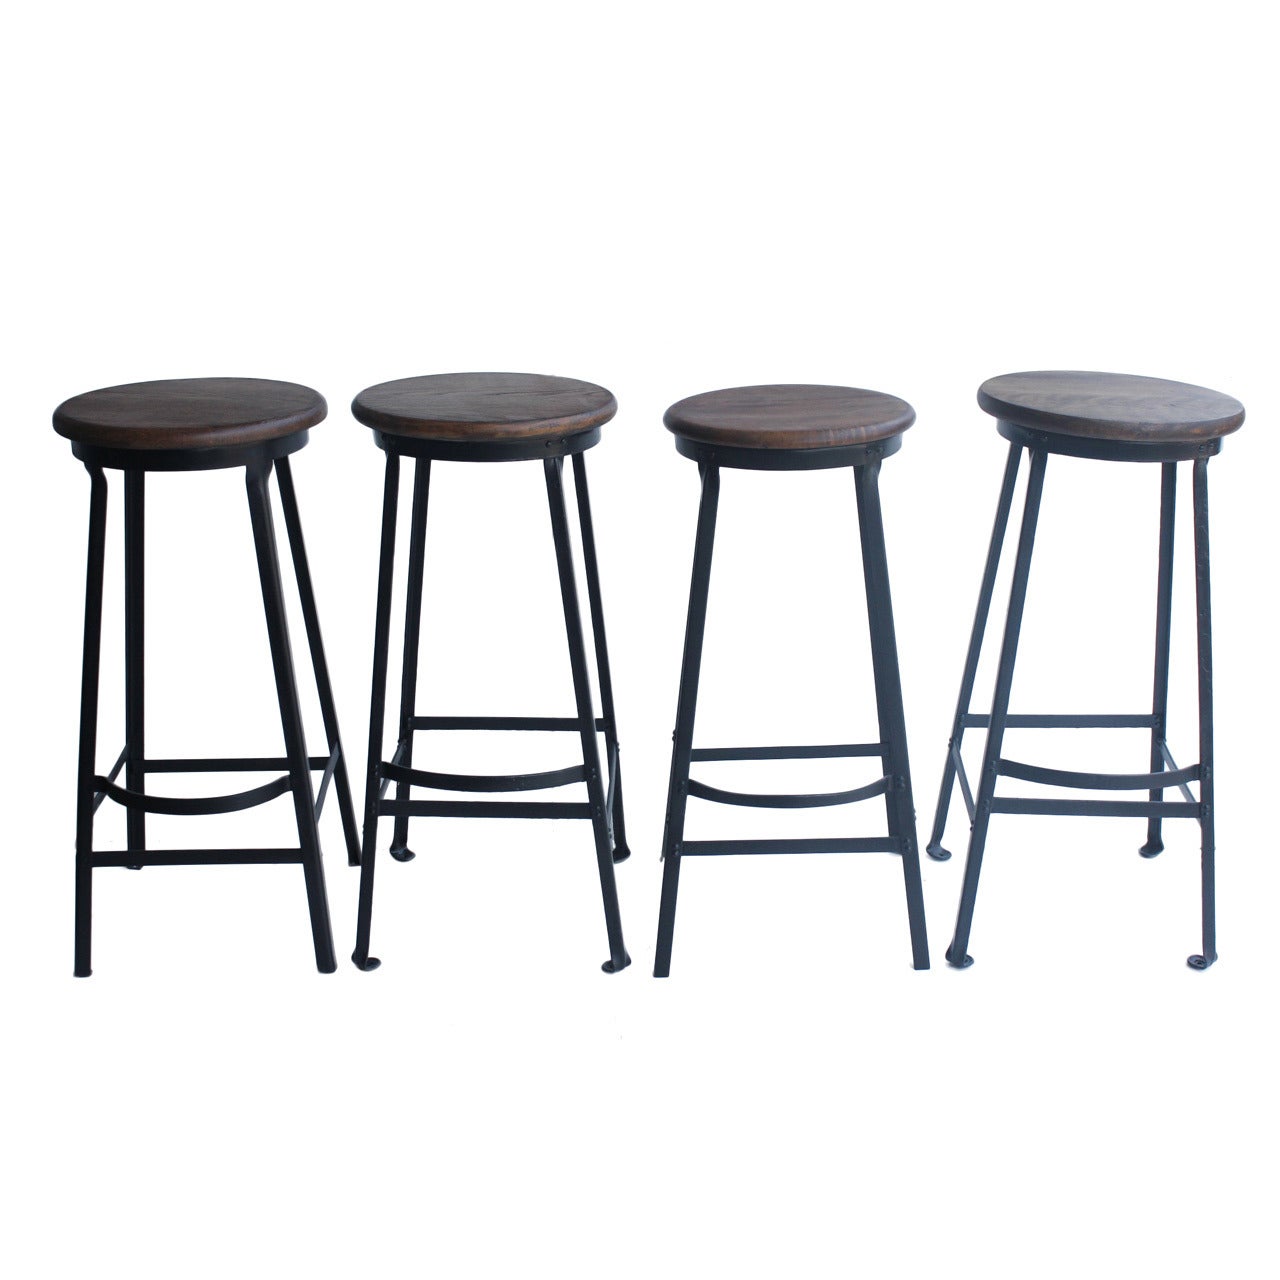 Vintage Original Industrial Stools, more available